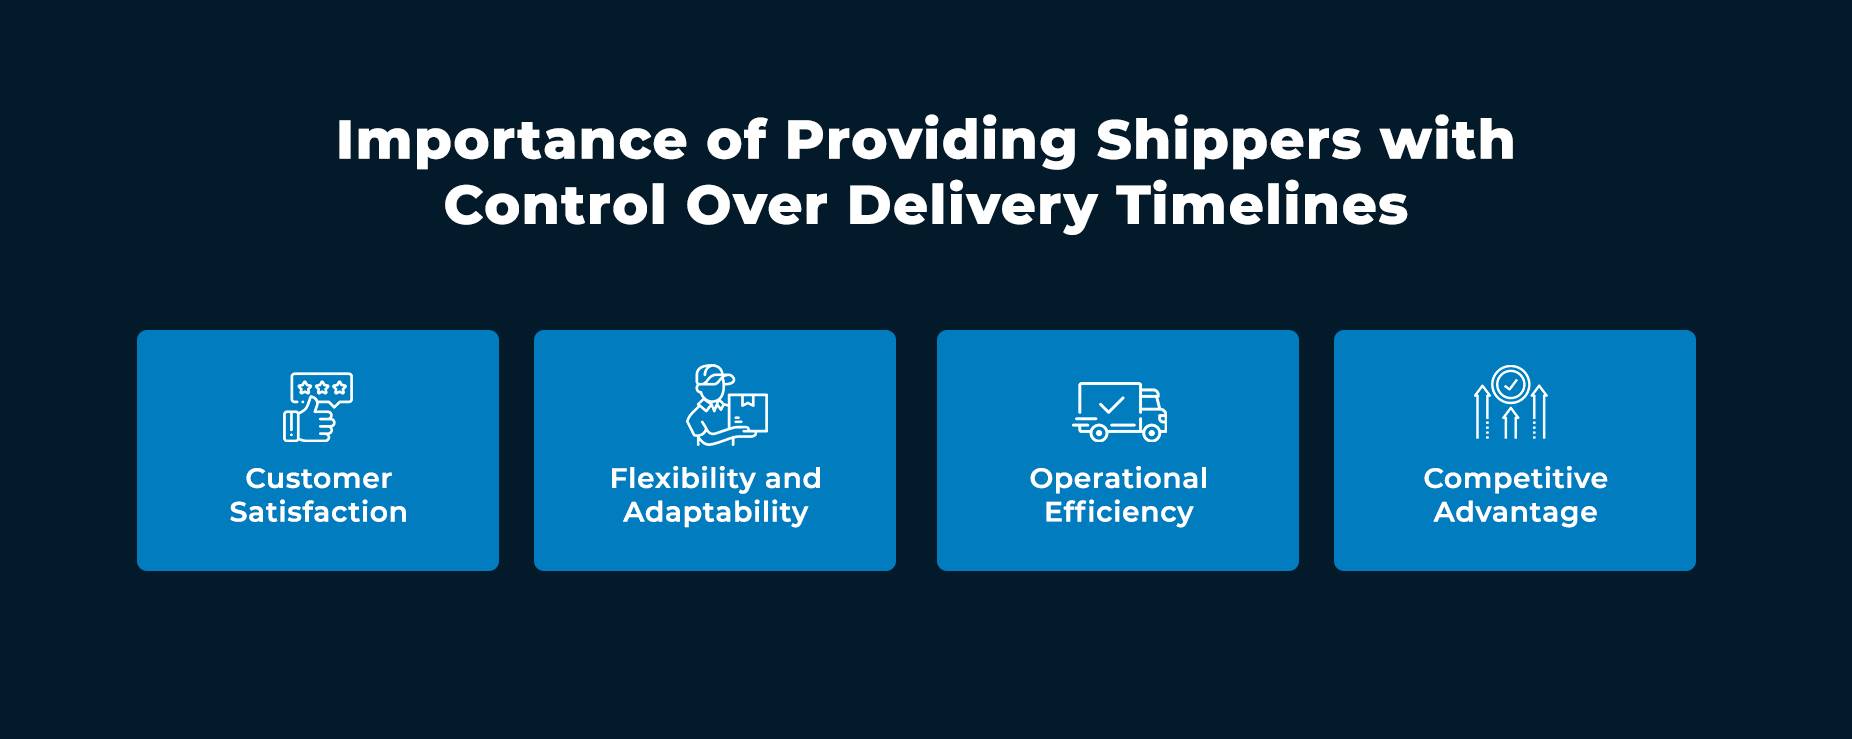 Give shipper control over delivery timelines